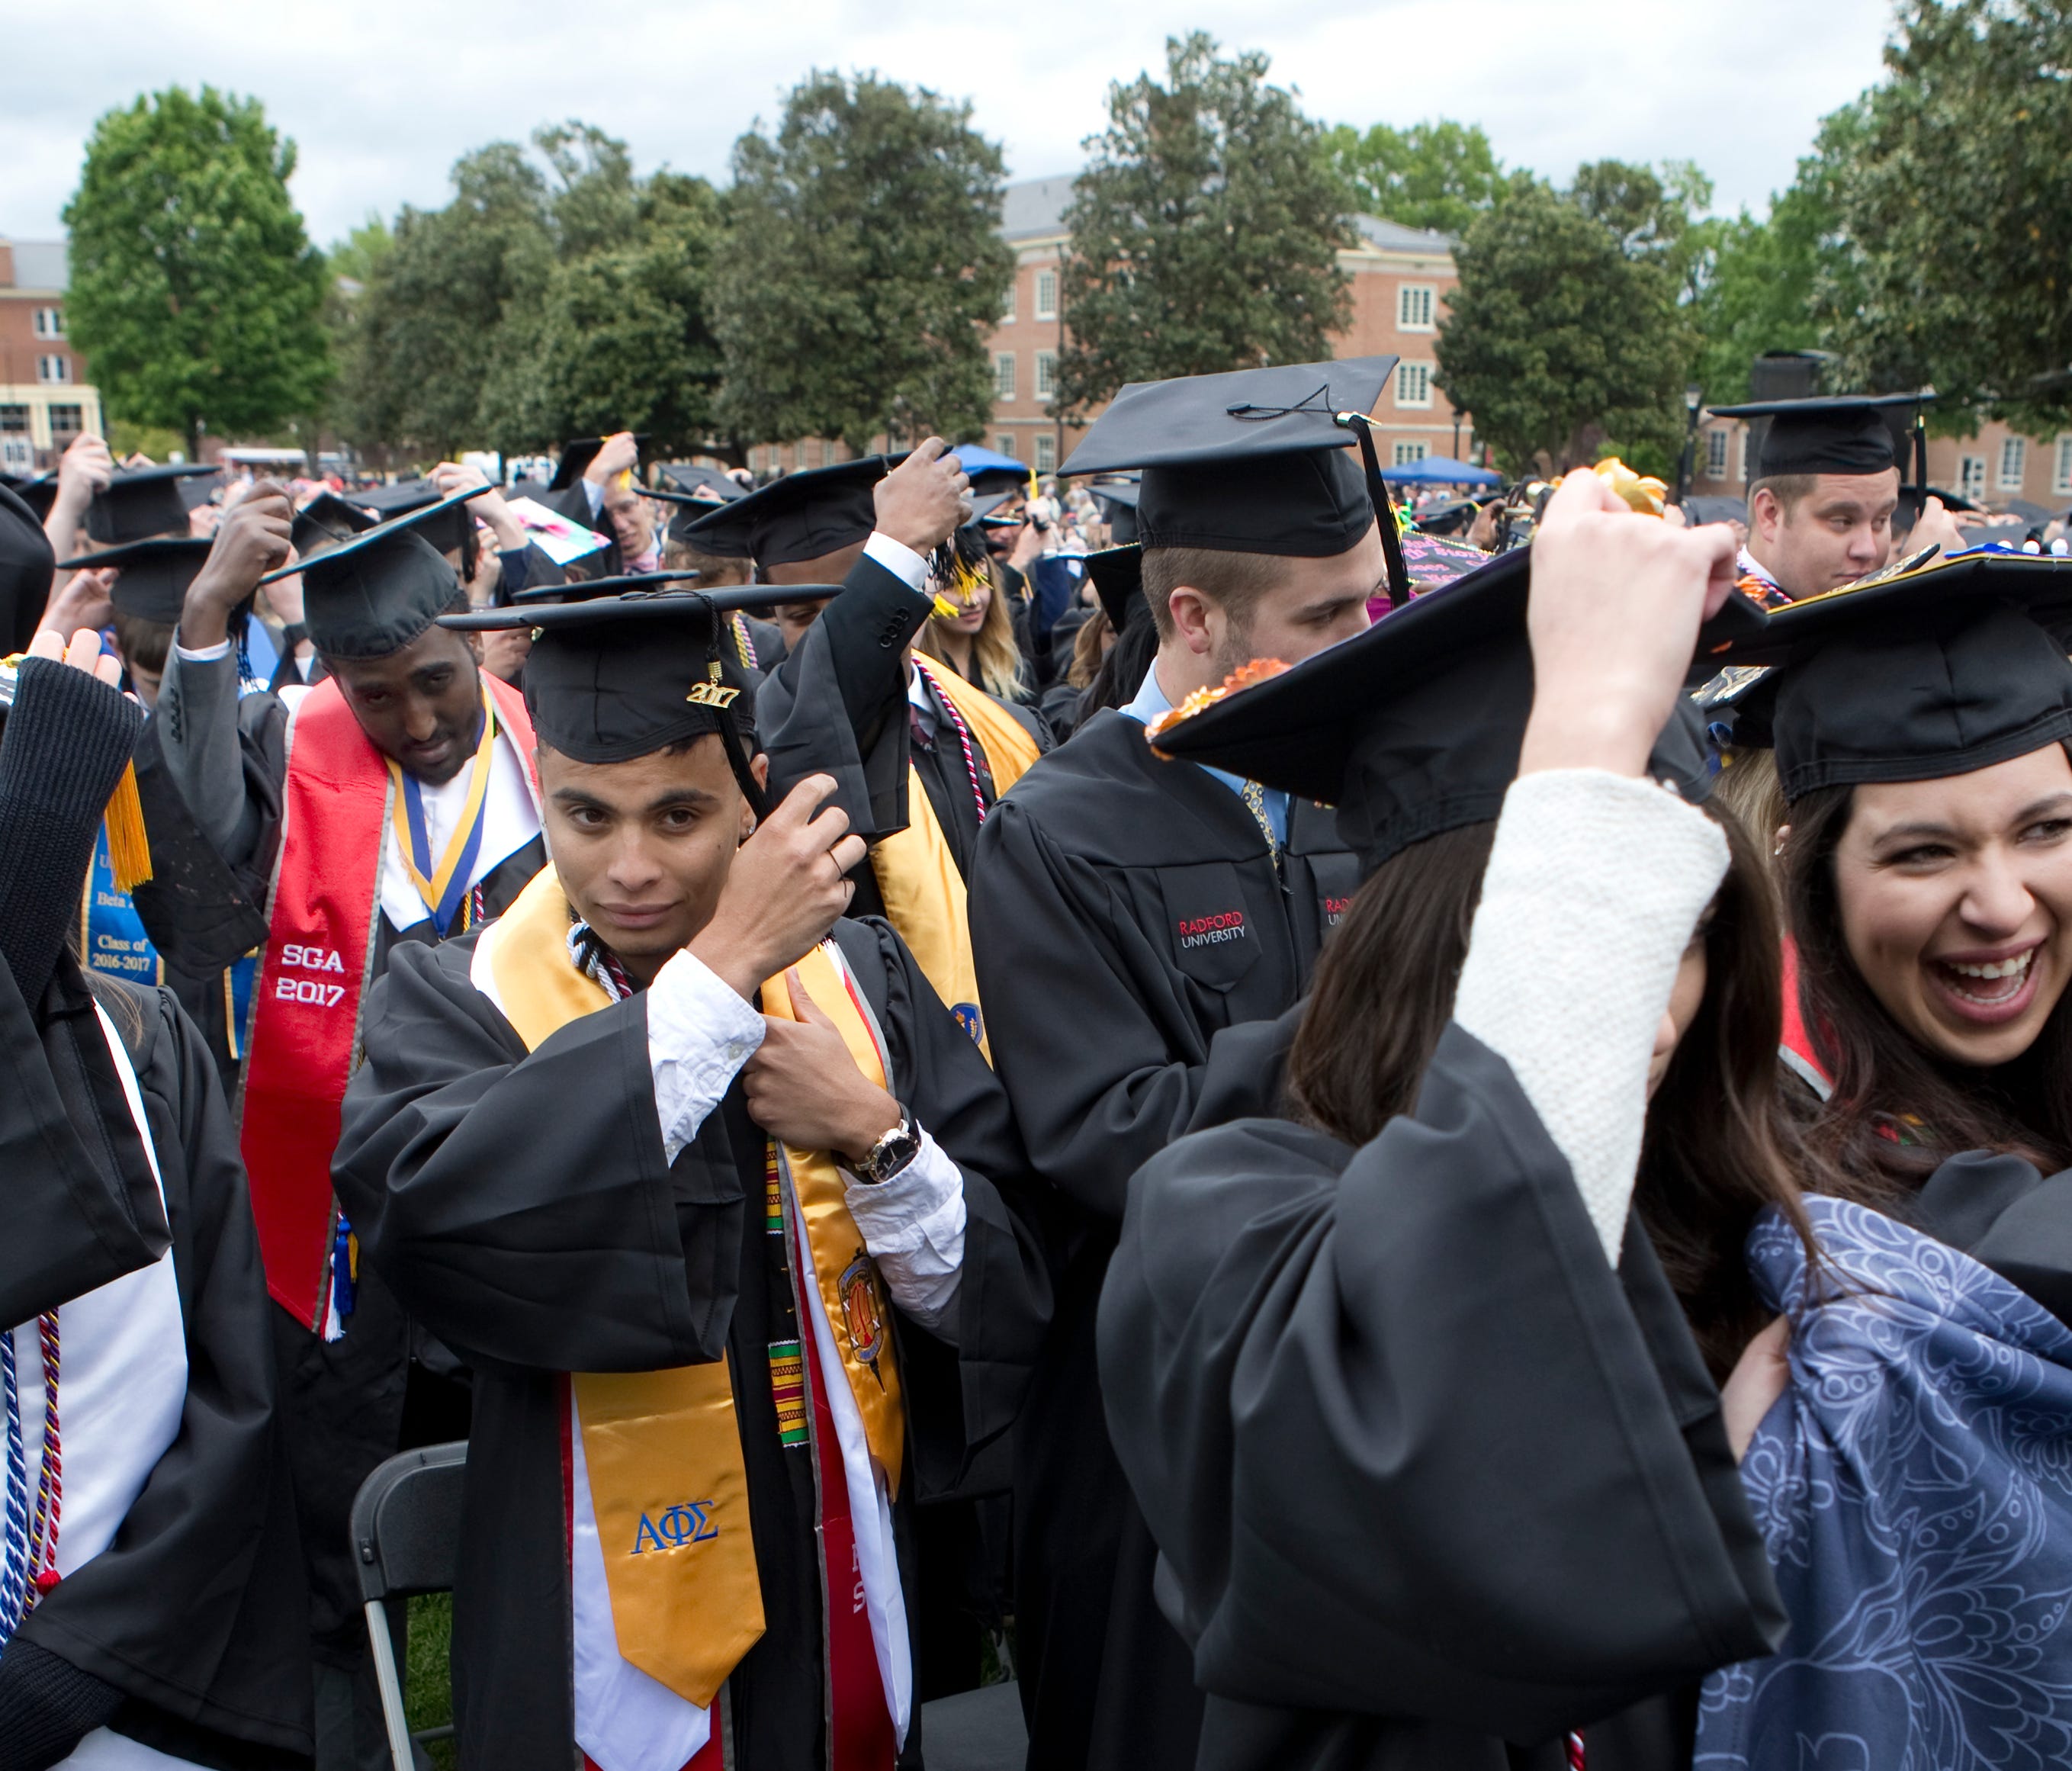 Graduates turn their tassels during the conferring of degrees portion of the commencement ceremony at Radford University May 6, 2017.